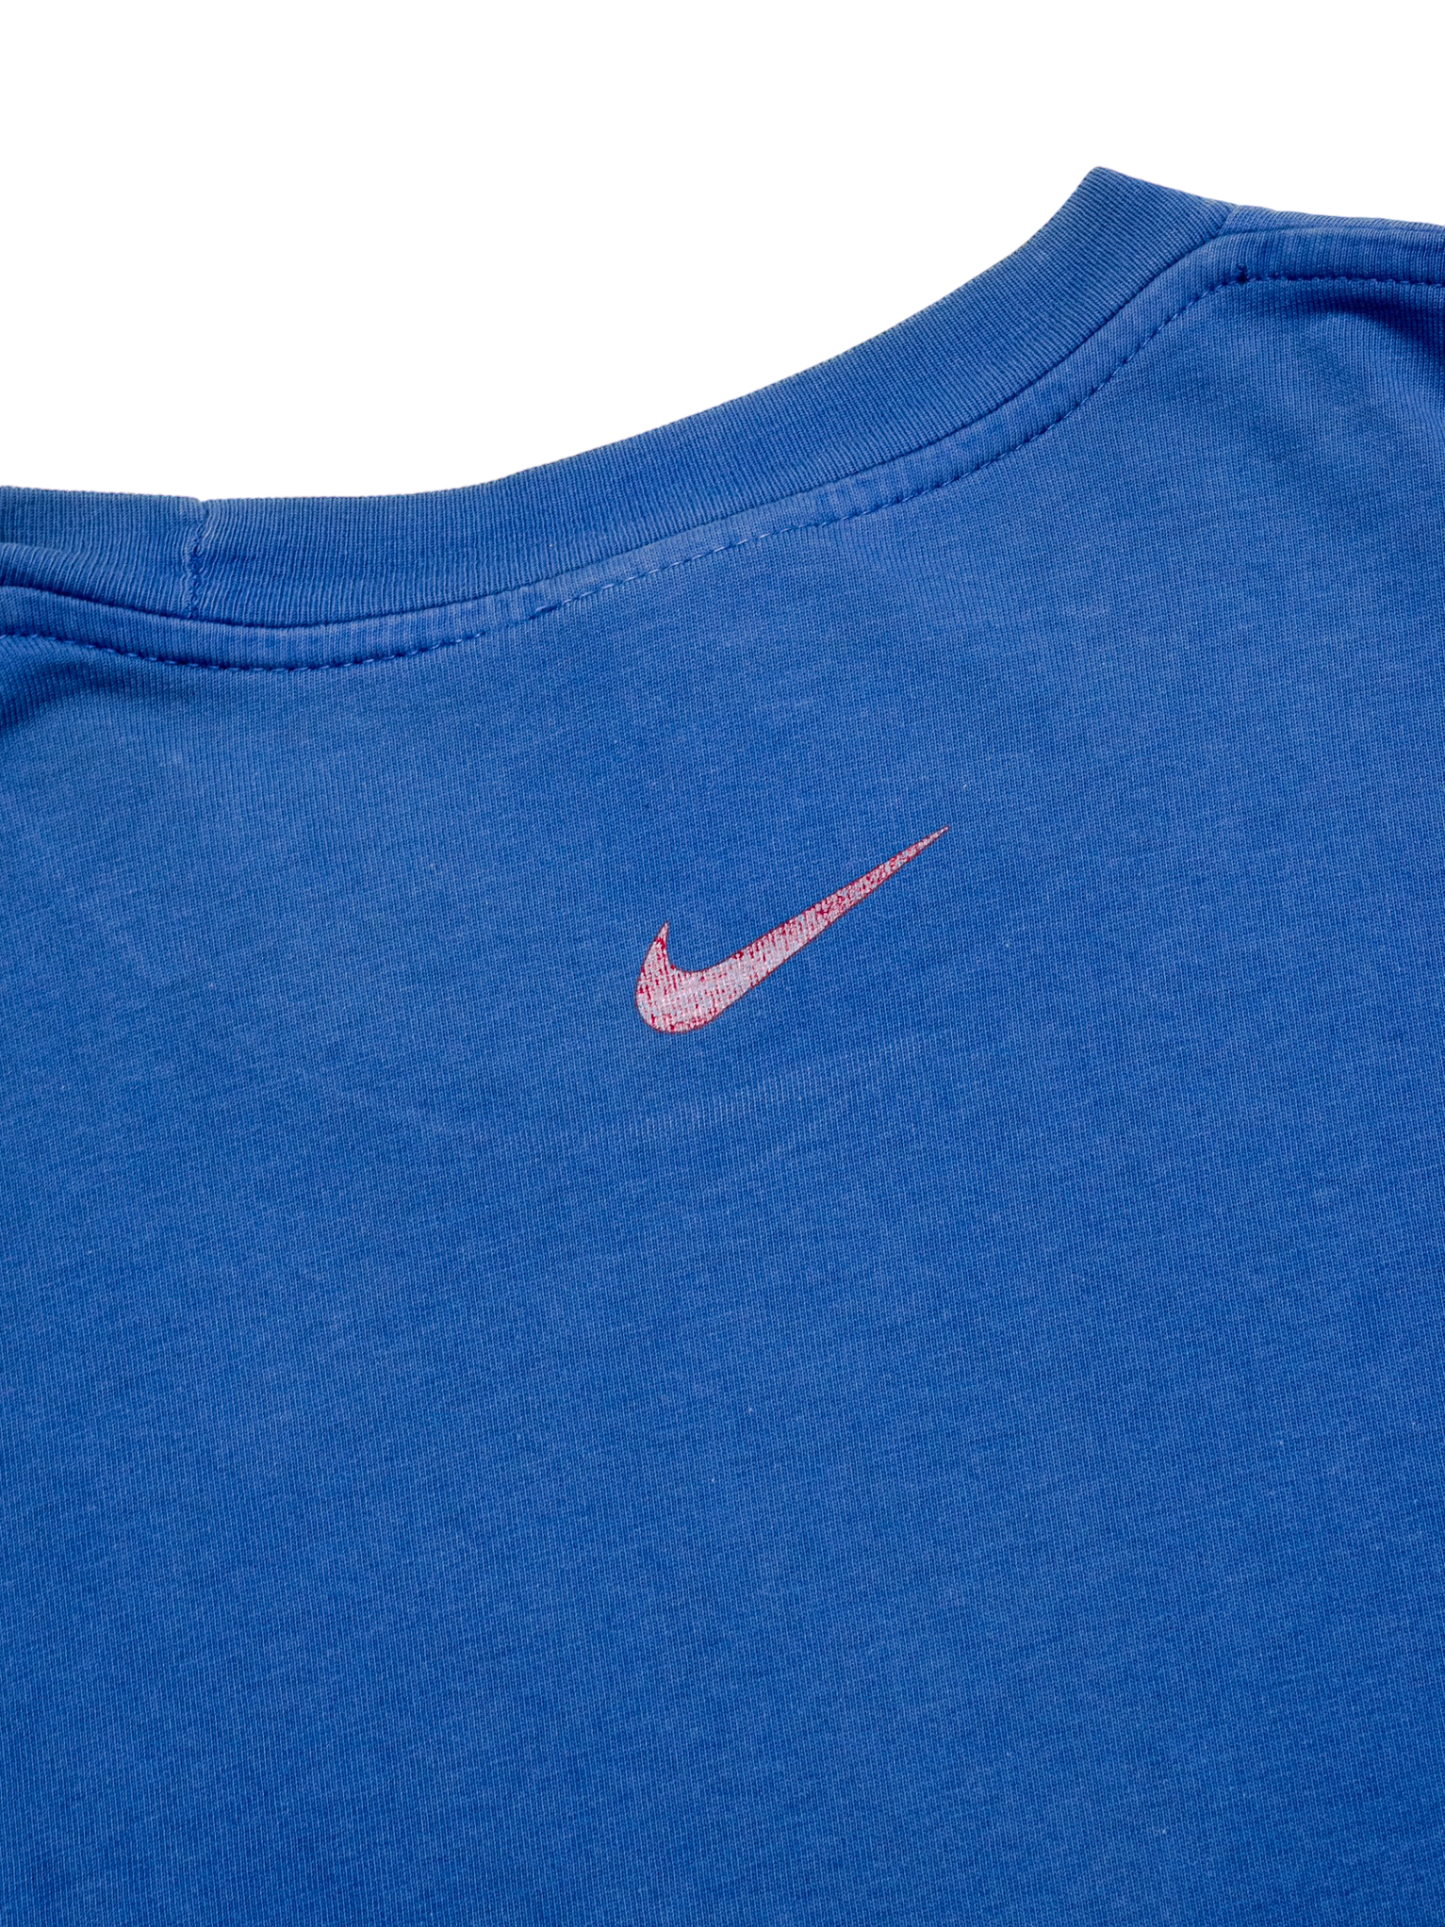 90's Nike "Just do it" tee - L